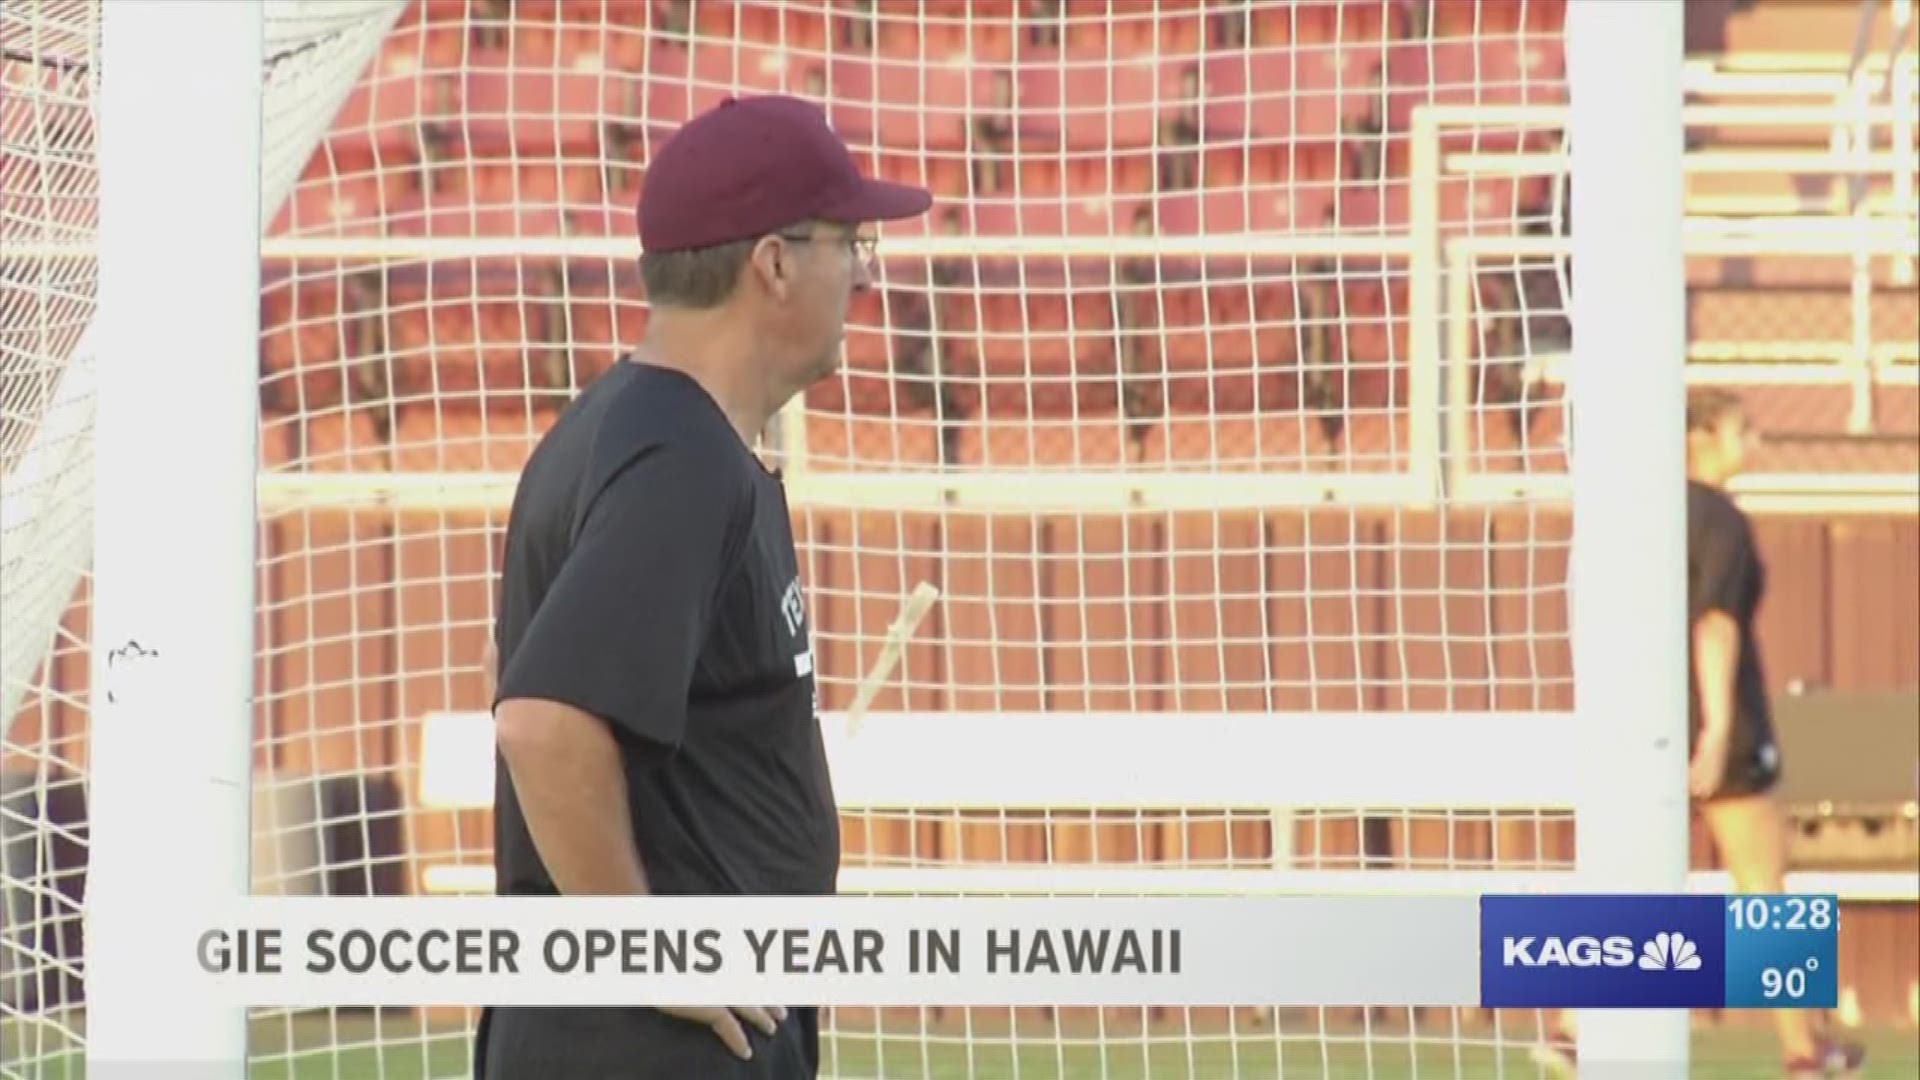 The Texas A&M soccer team will open the 2018 season in Hawaii on Friday.